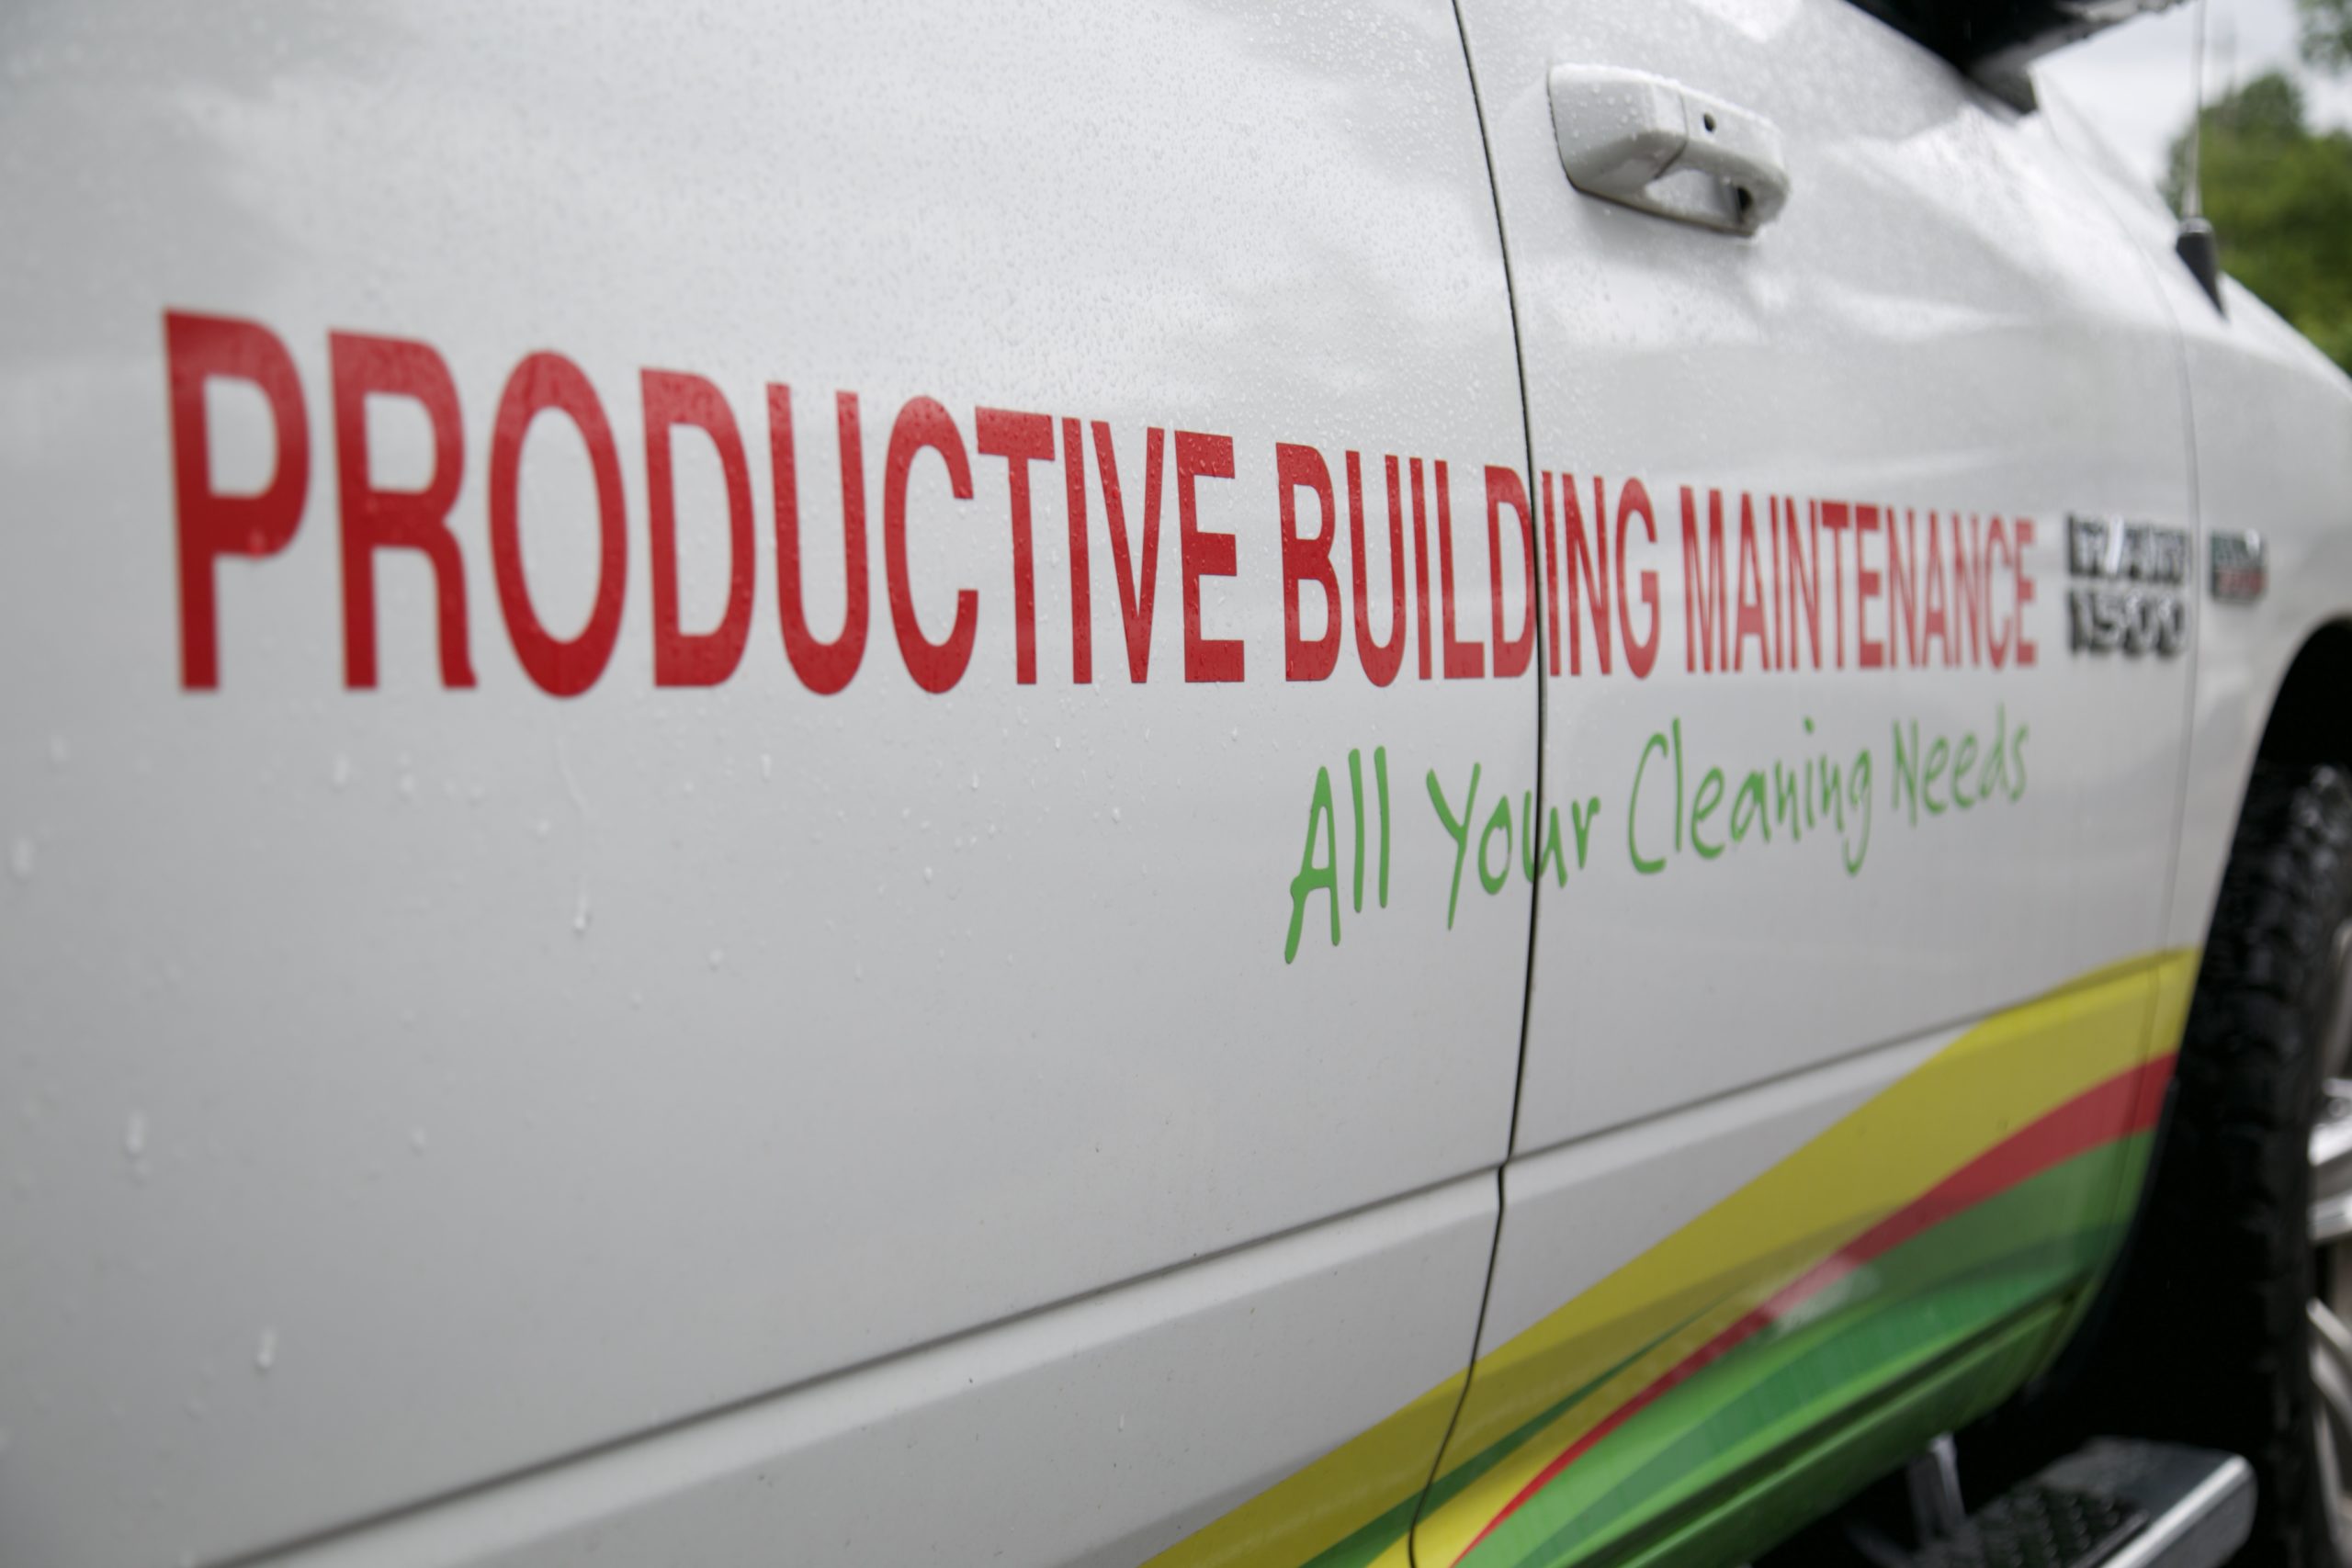 Productive Building Maintenance cleaning vehiclesProductive Building Maintenance cleaning vehicles